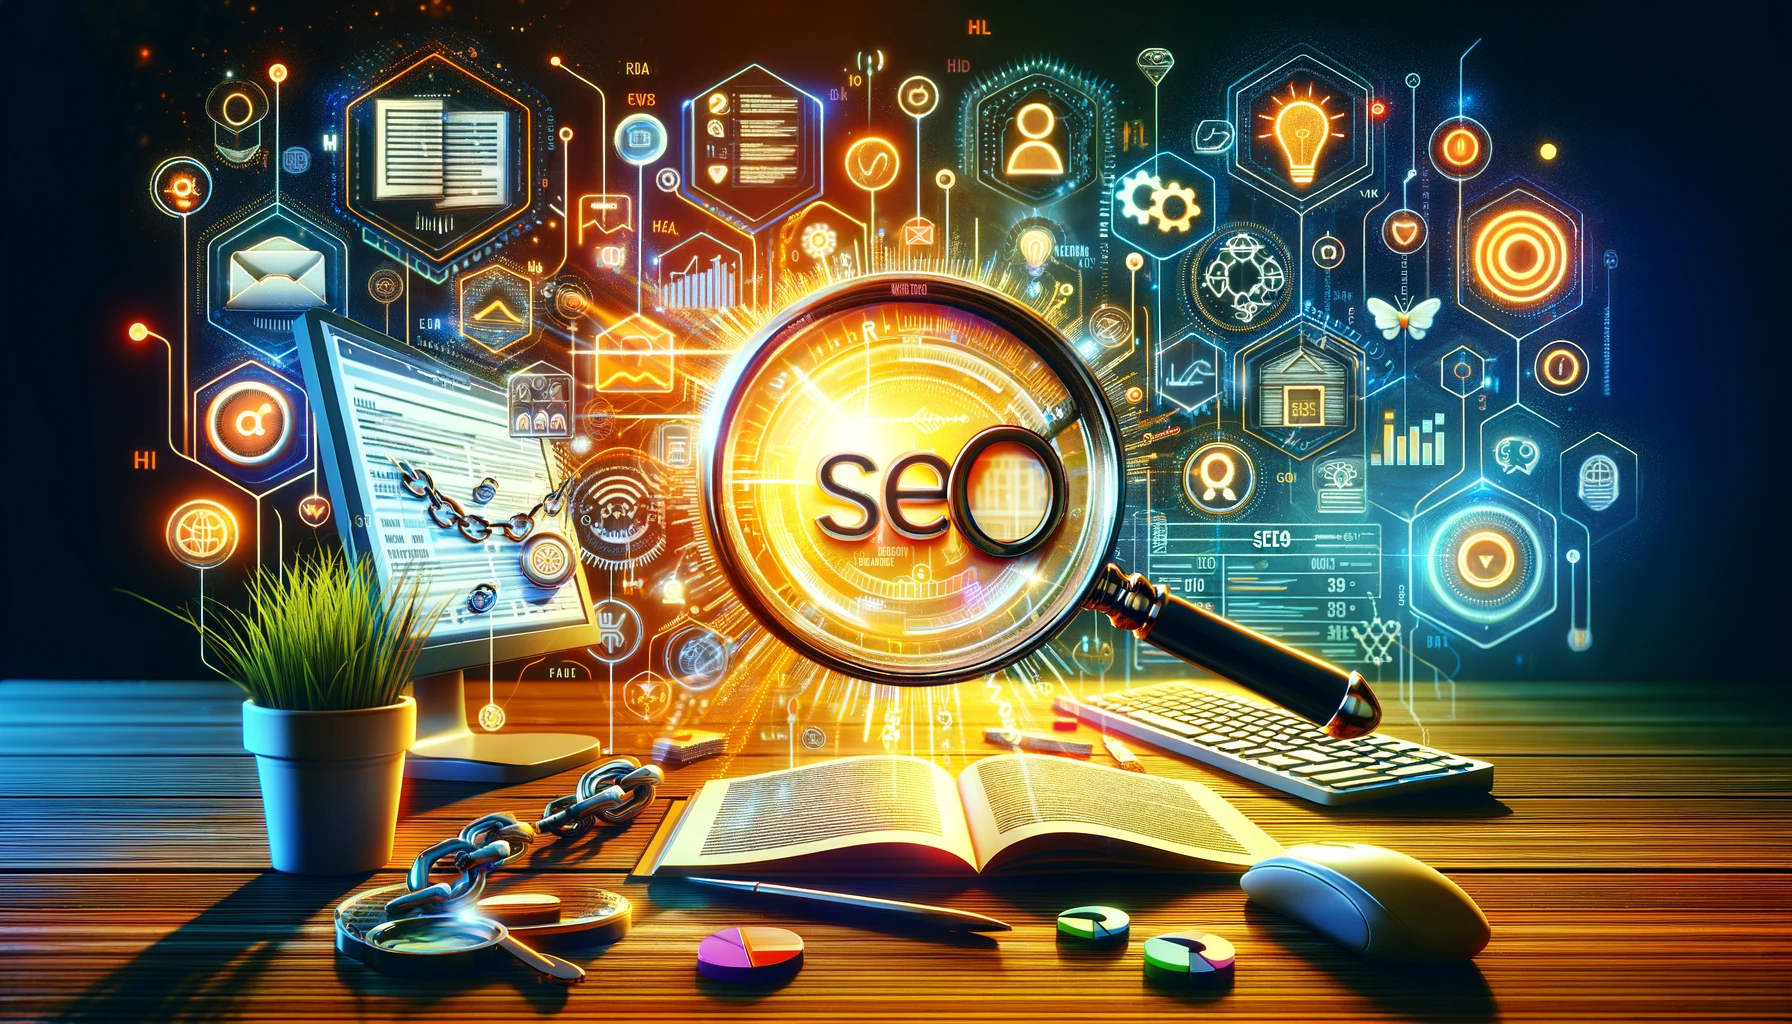 A vibrant depiction of a digital workspace with elements representing SEO content writing, including keyword research, link building, and analytics. Explore SEO Content Writing Tips now!